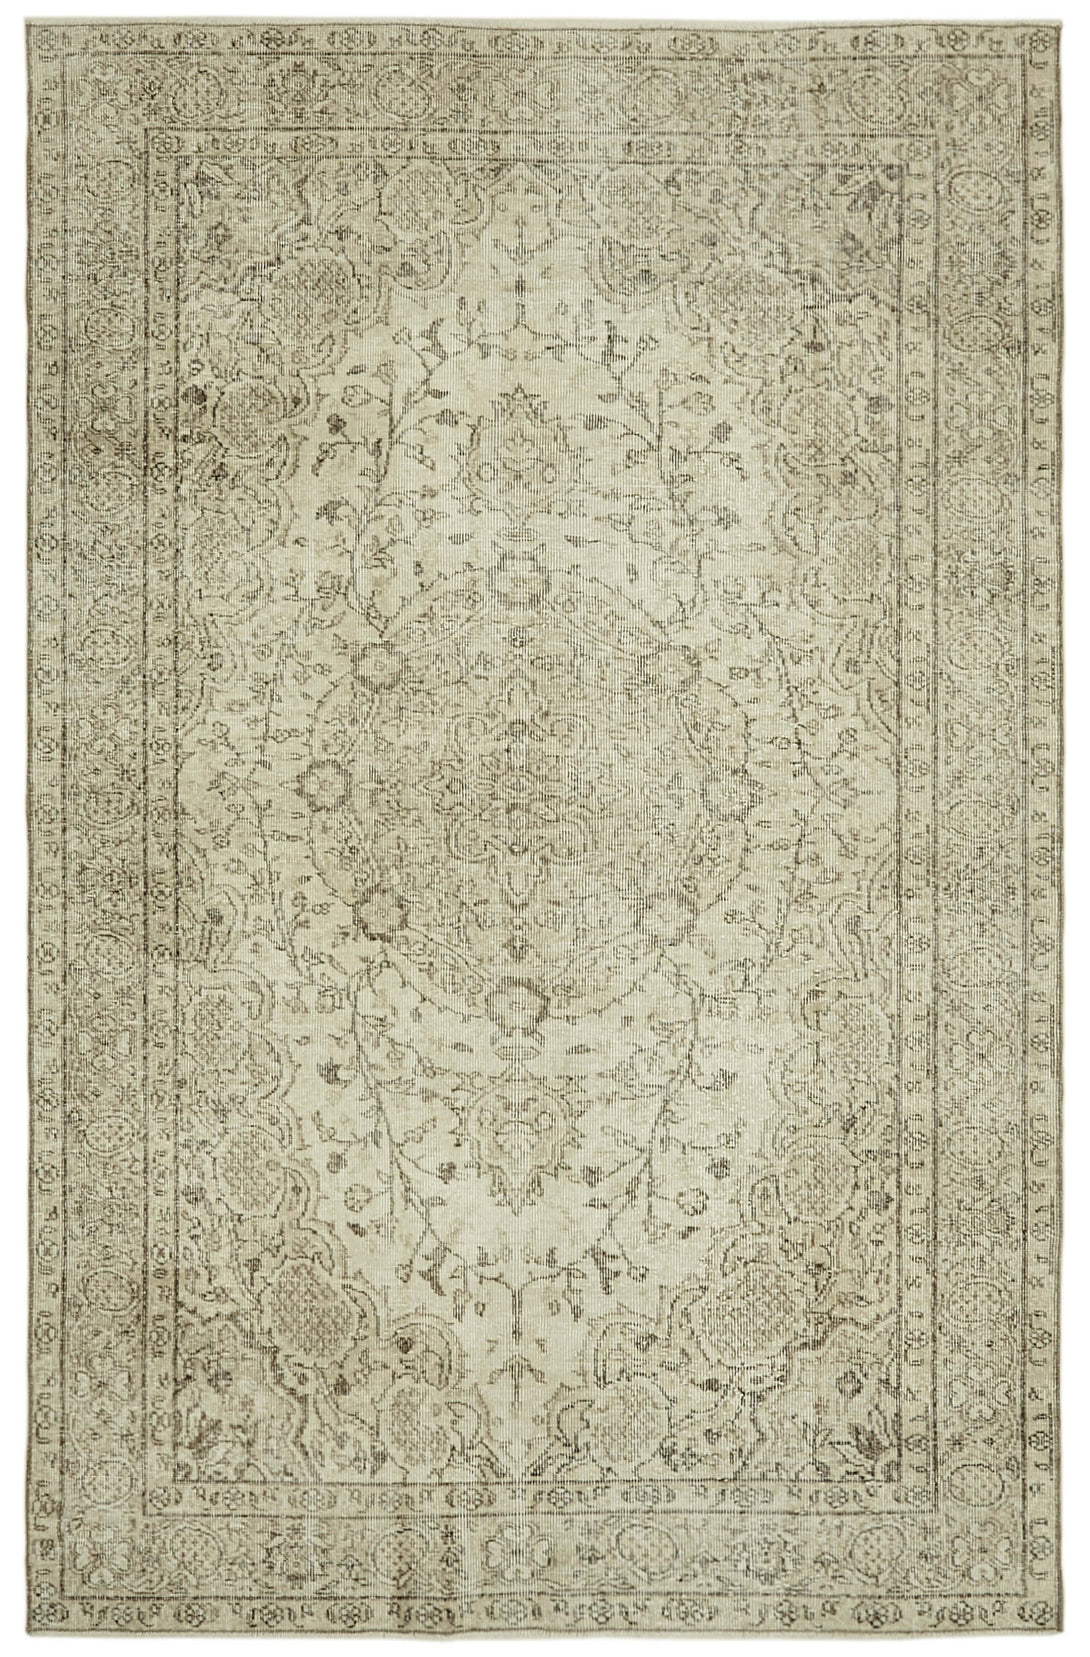 Handmade White Wash Area Rug > Design# OL-AC-41479 > Size: 5'-8" x 8'-8", Carpet Culture Rugs, Handmade Rugs, NYC Rugs, New Rugs, Shop Rugs, Rug Store, Outlet Rugs, SoHo Rugs, Rugs in USA